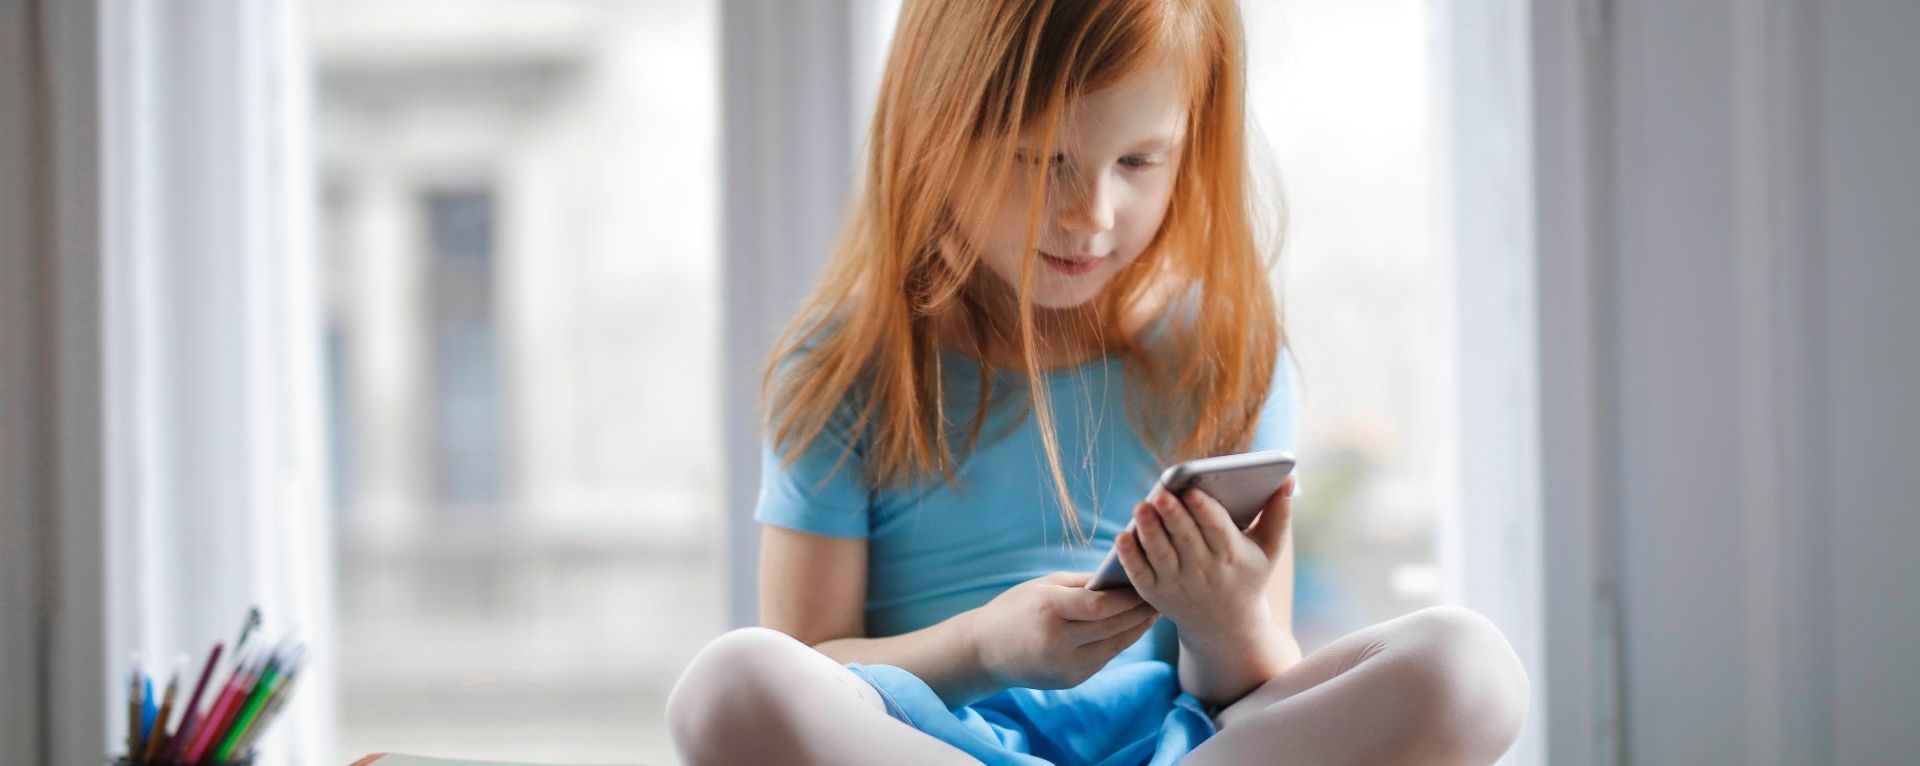 Top 5 Apps to Keep Your Kids Safe Online